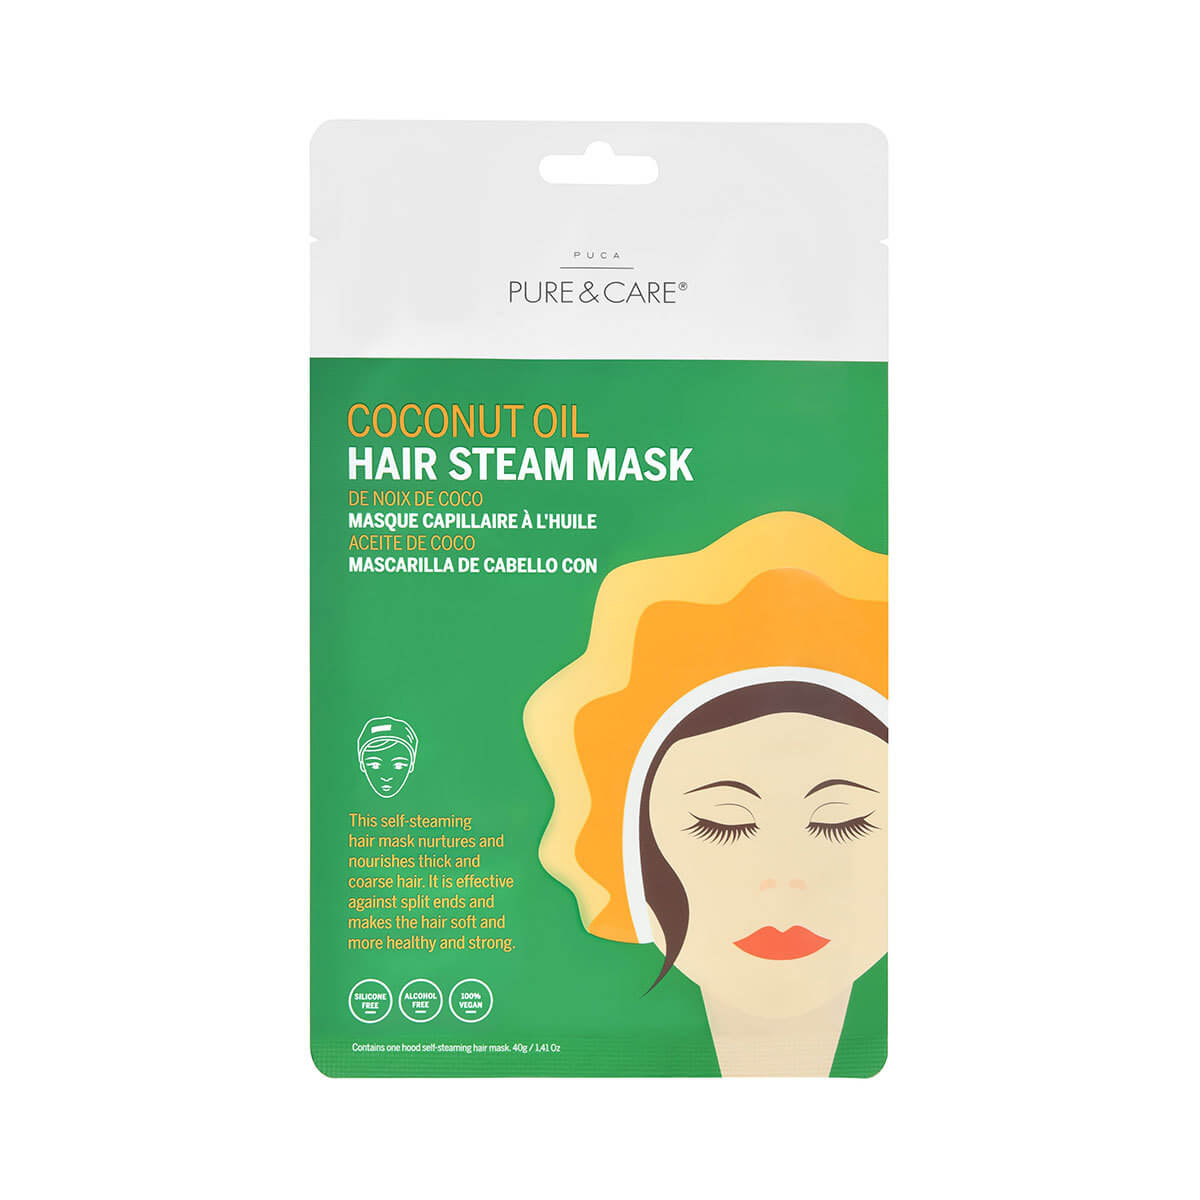 Coconut Oil Hair Steam Mask for soft and strong hair I PUCA - PURE & CARE